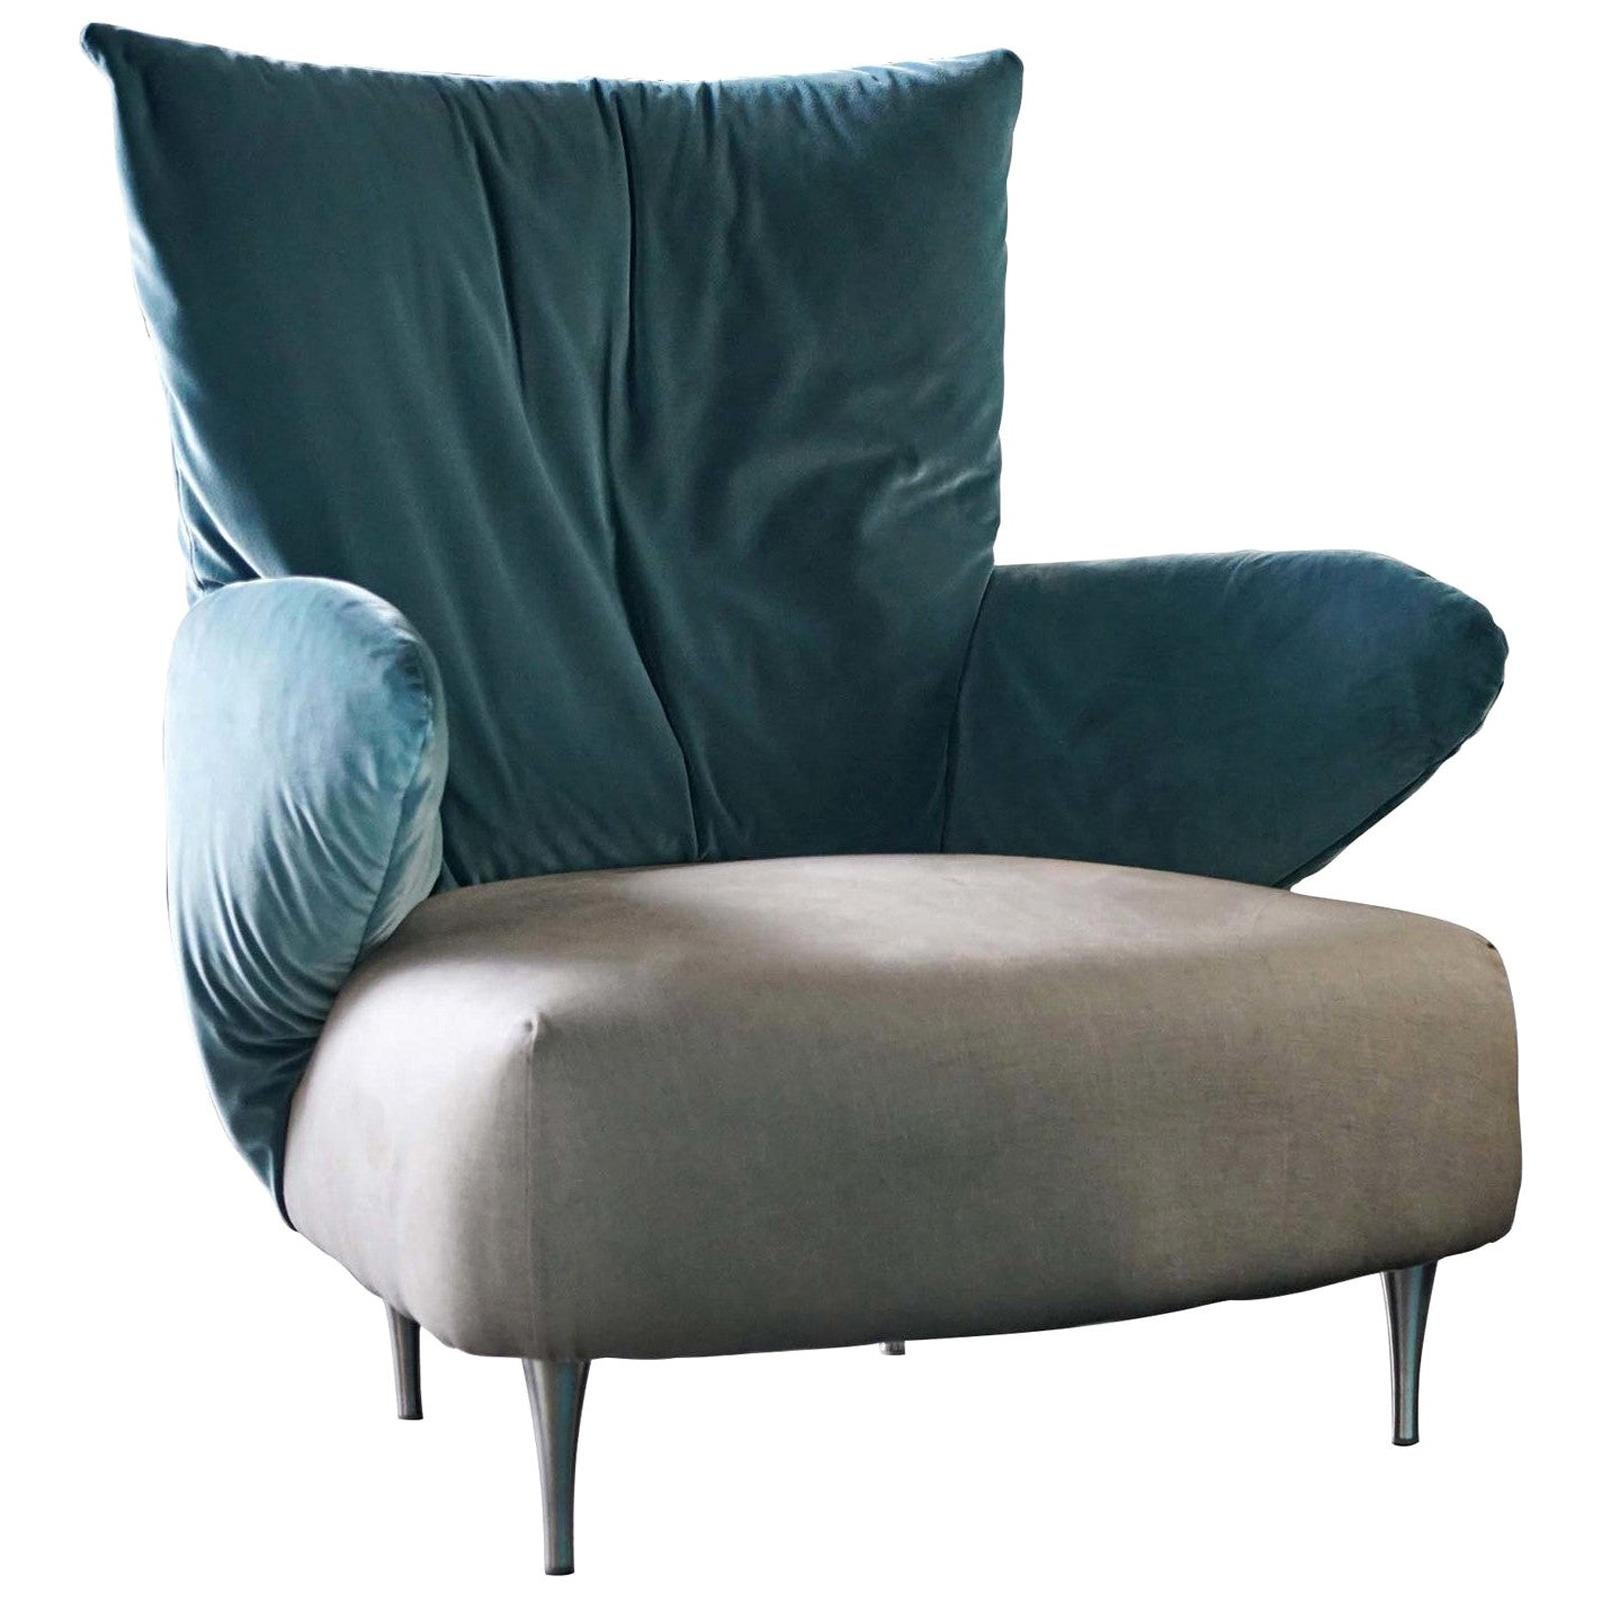 Pank Armchair by Andrea Vecera #2 For Sale